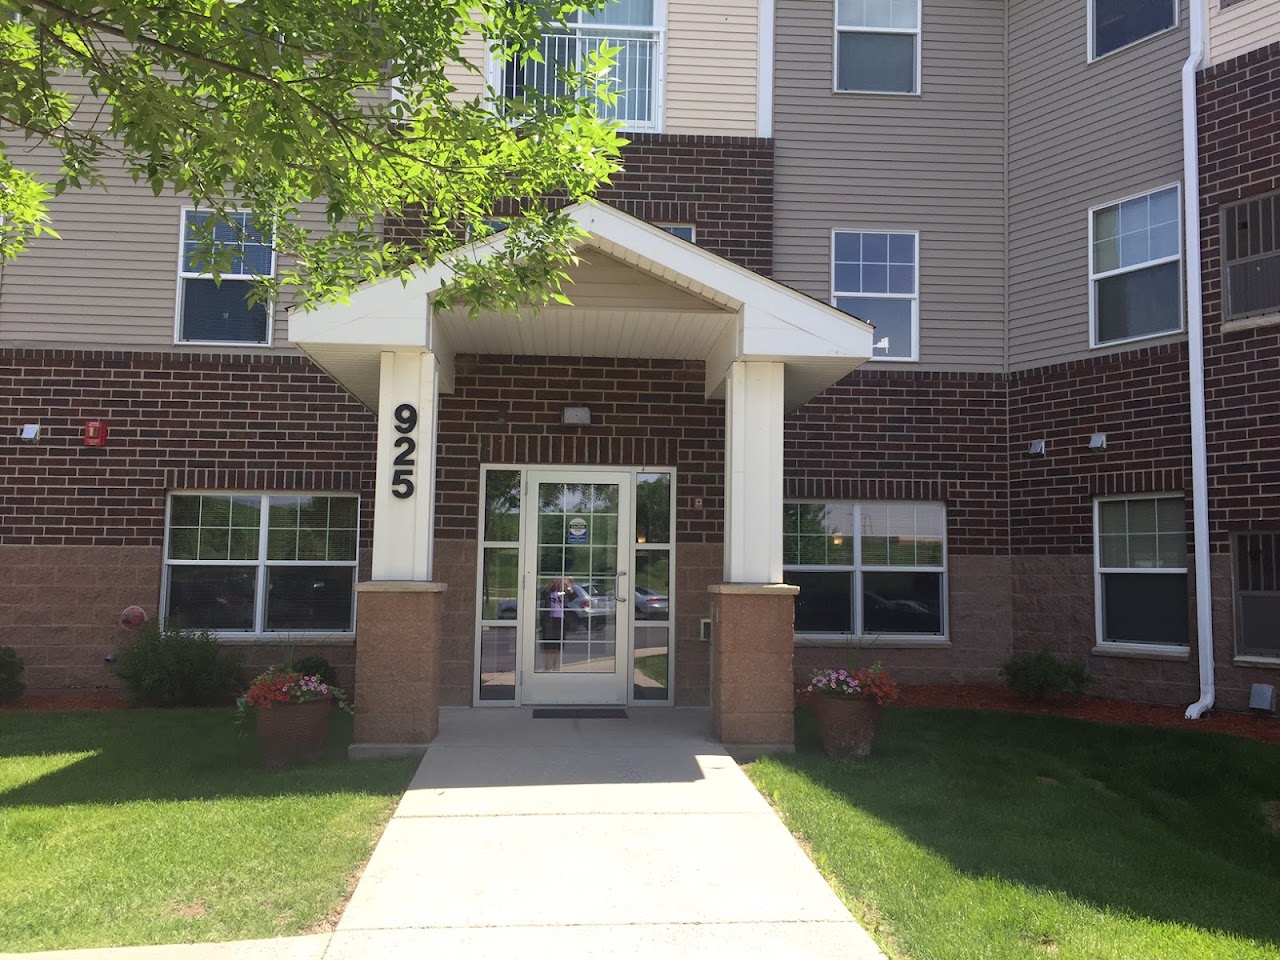 Photo of INTERLAKEN PLACE. Affordable housing located at 925 AIRPORT ROAD WACONIA, MN 55387